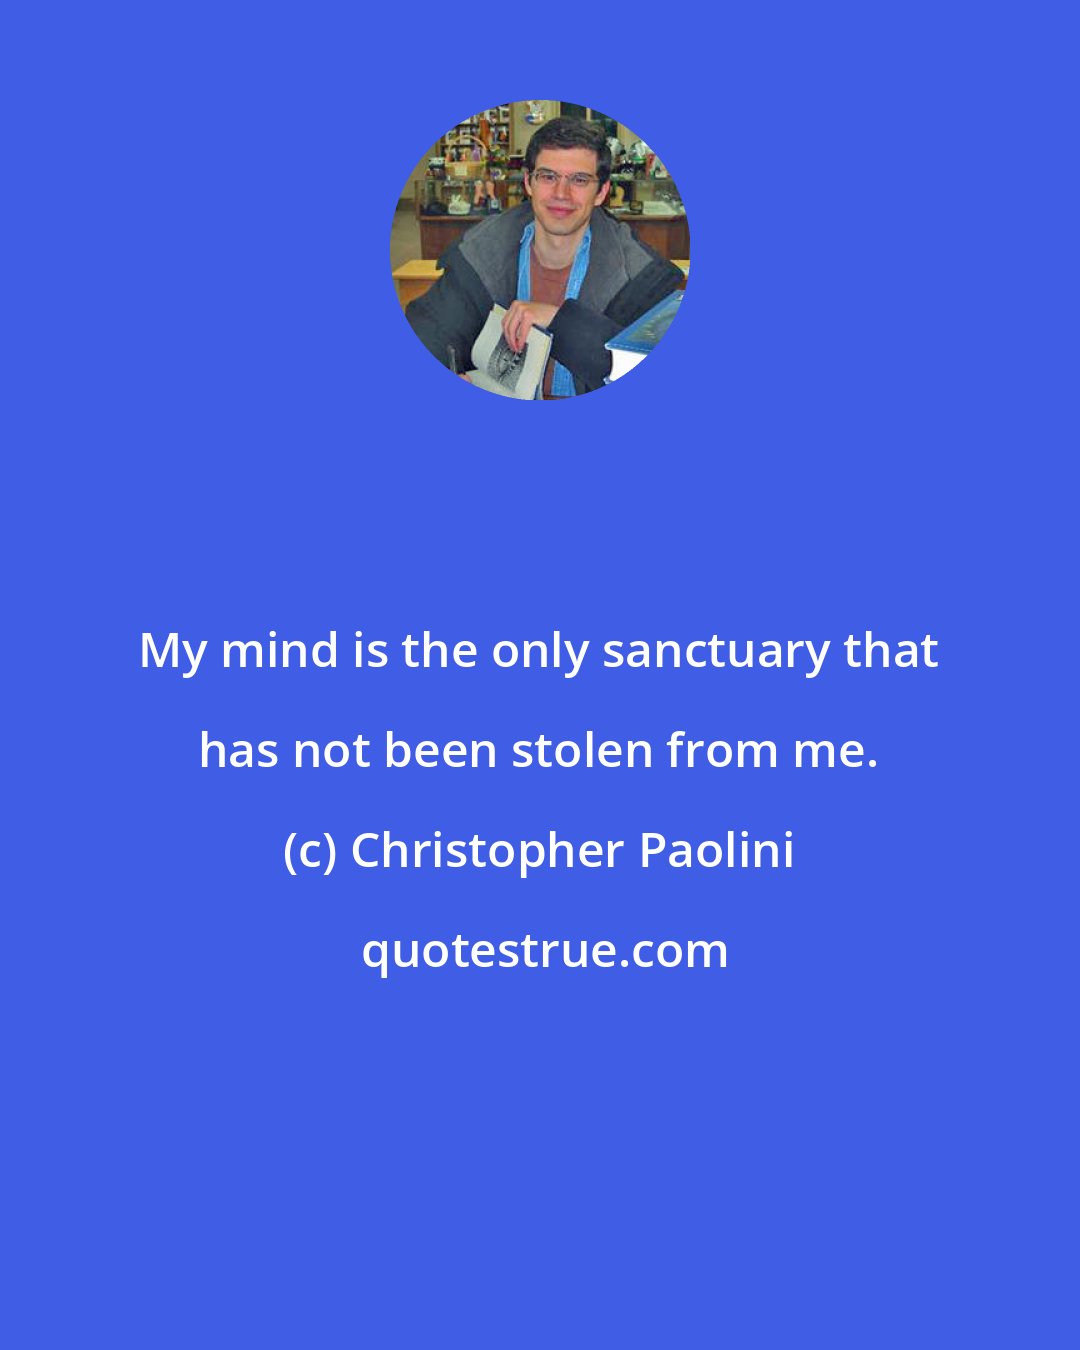 Christopher Paolini: My mind is the only sanctuary that has not been stolen from me.